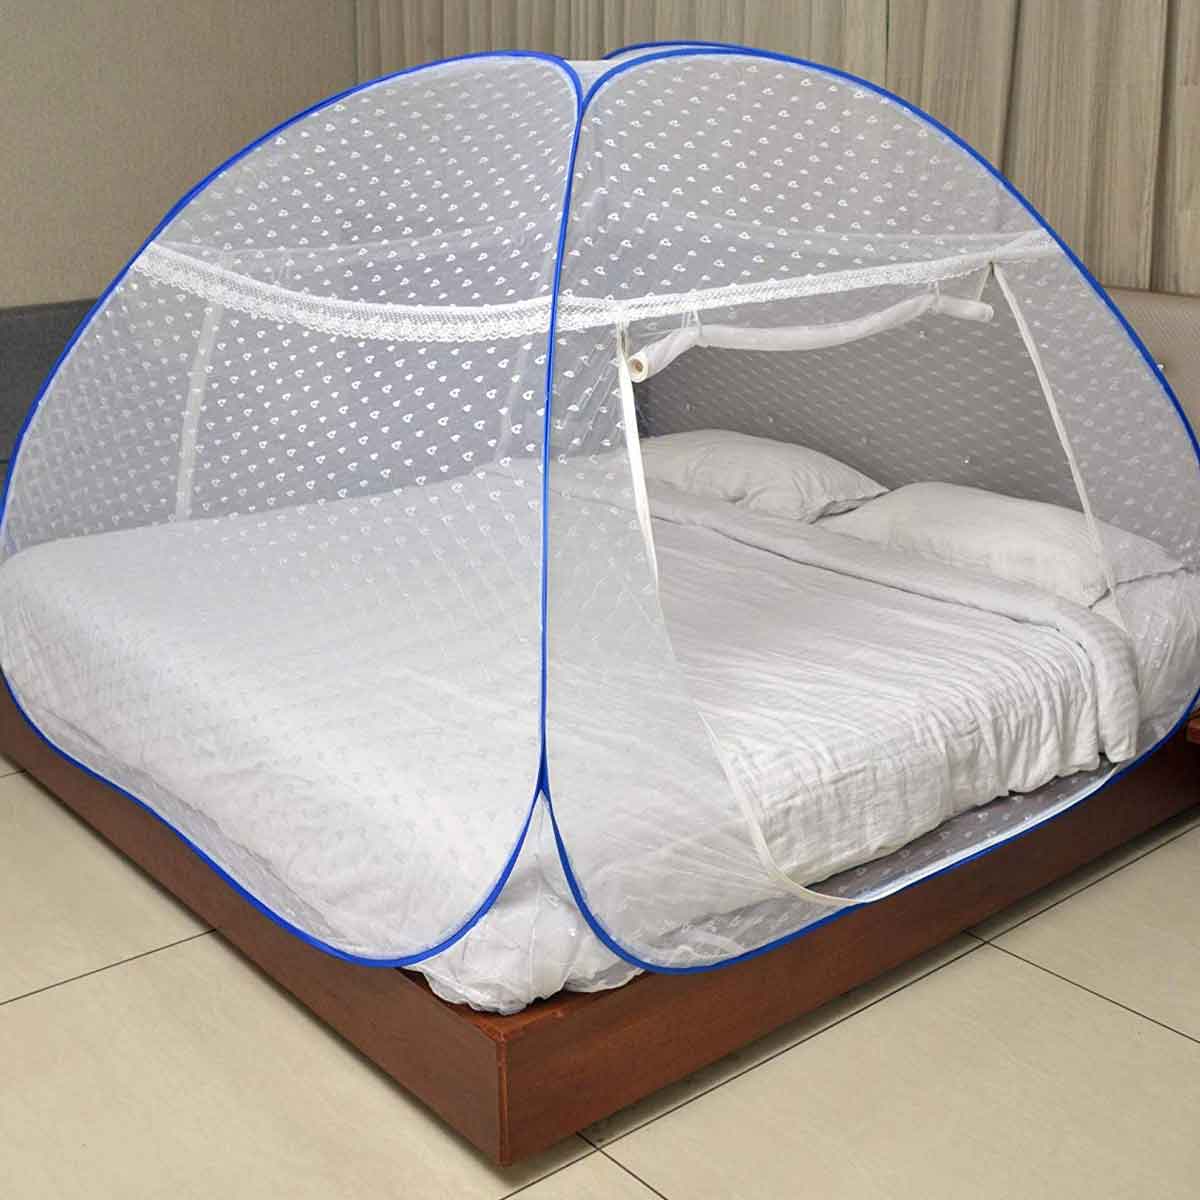 Foldable Polyester Double Bed Mosquito Net - Embroidery (White)